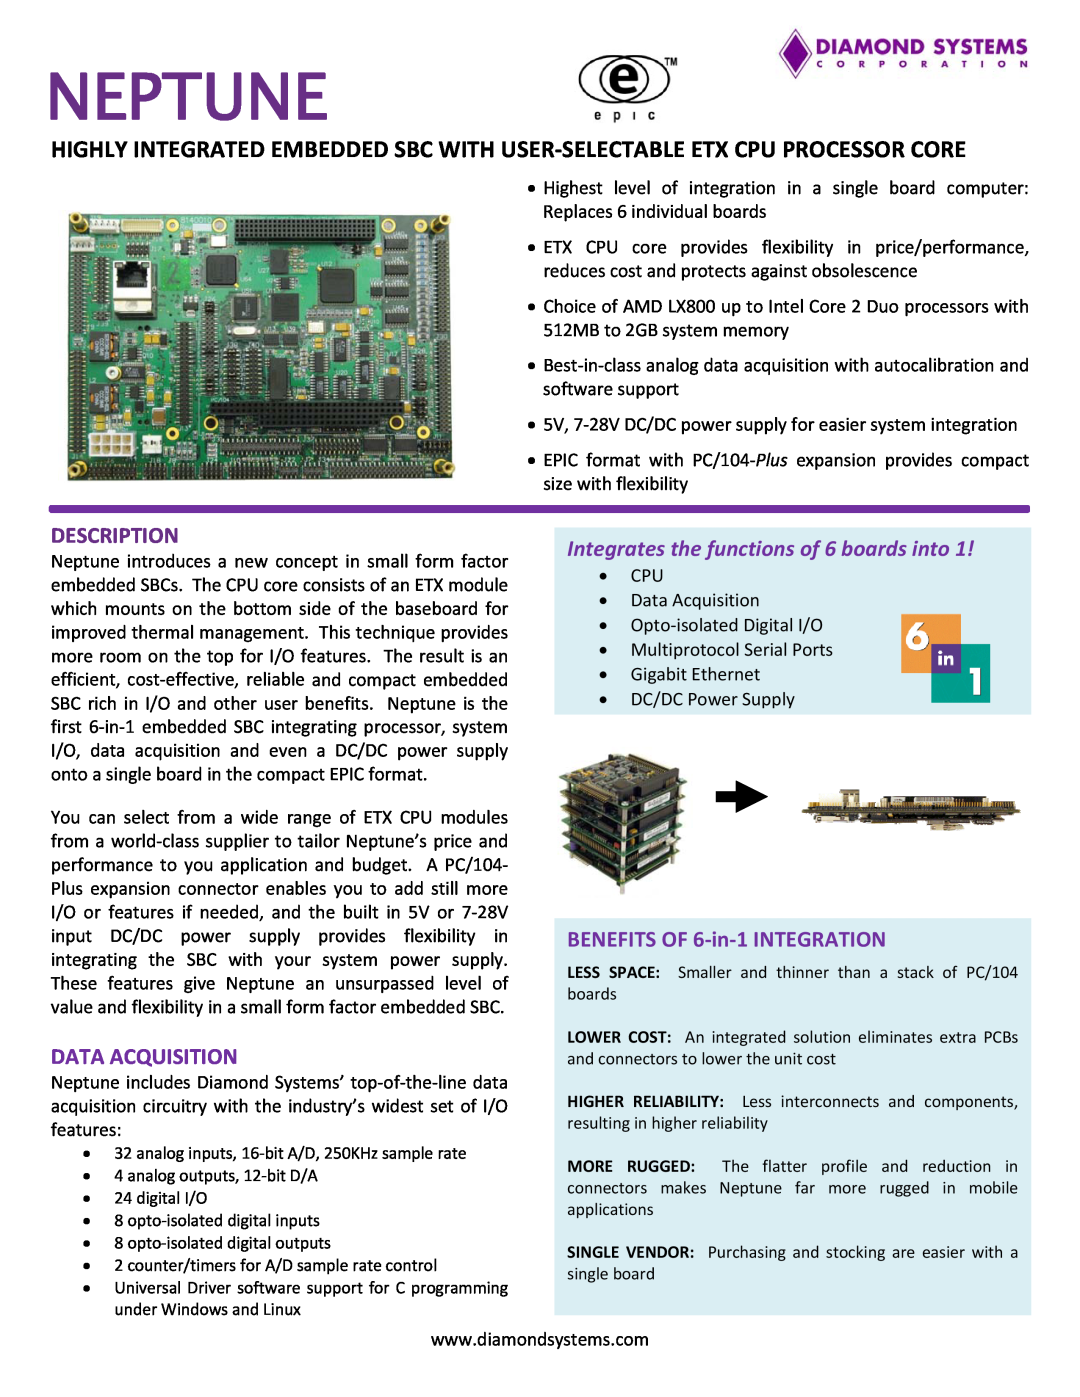 Diamond Systems Highly Integrated Embedded SBC With Userselectable ETX CPU Processor Core manual Description, Neptune 